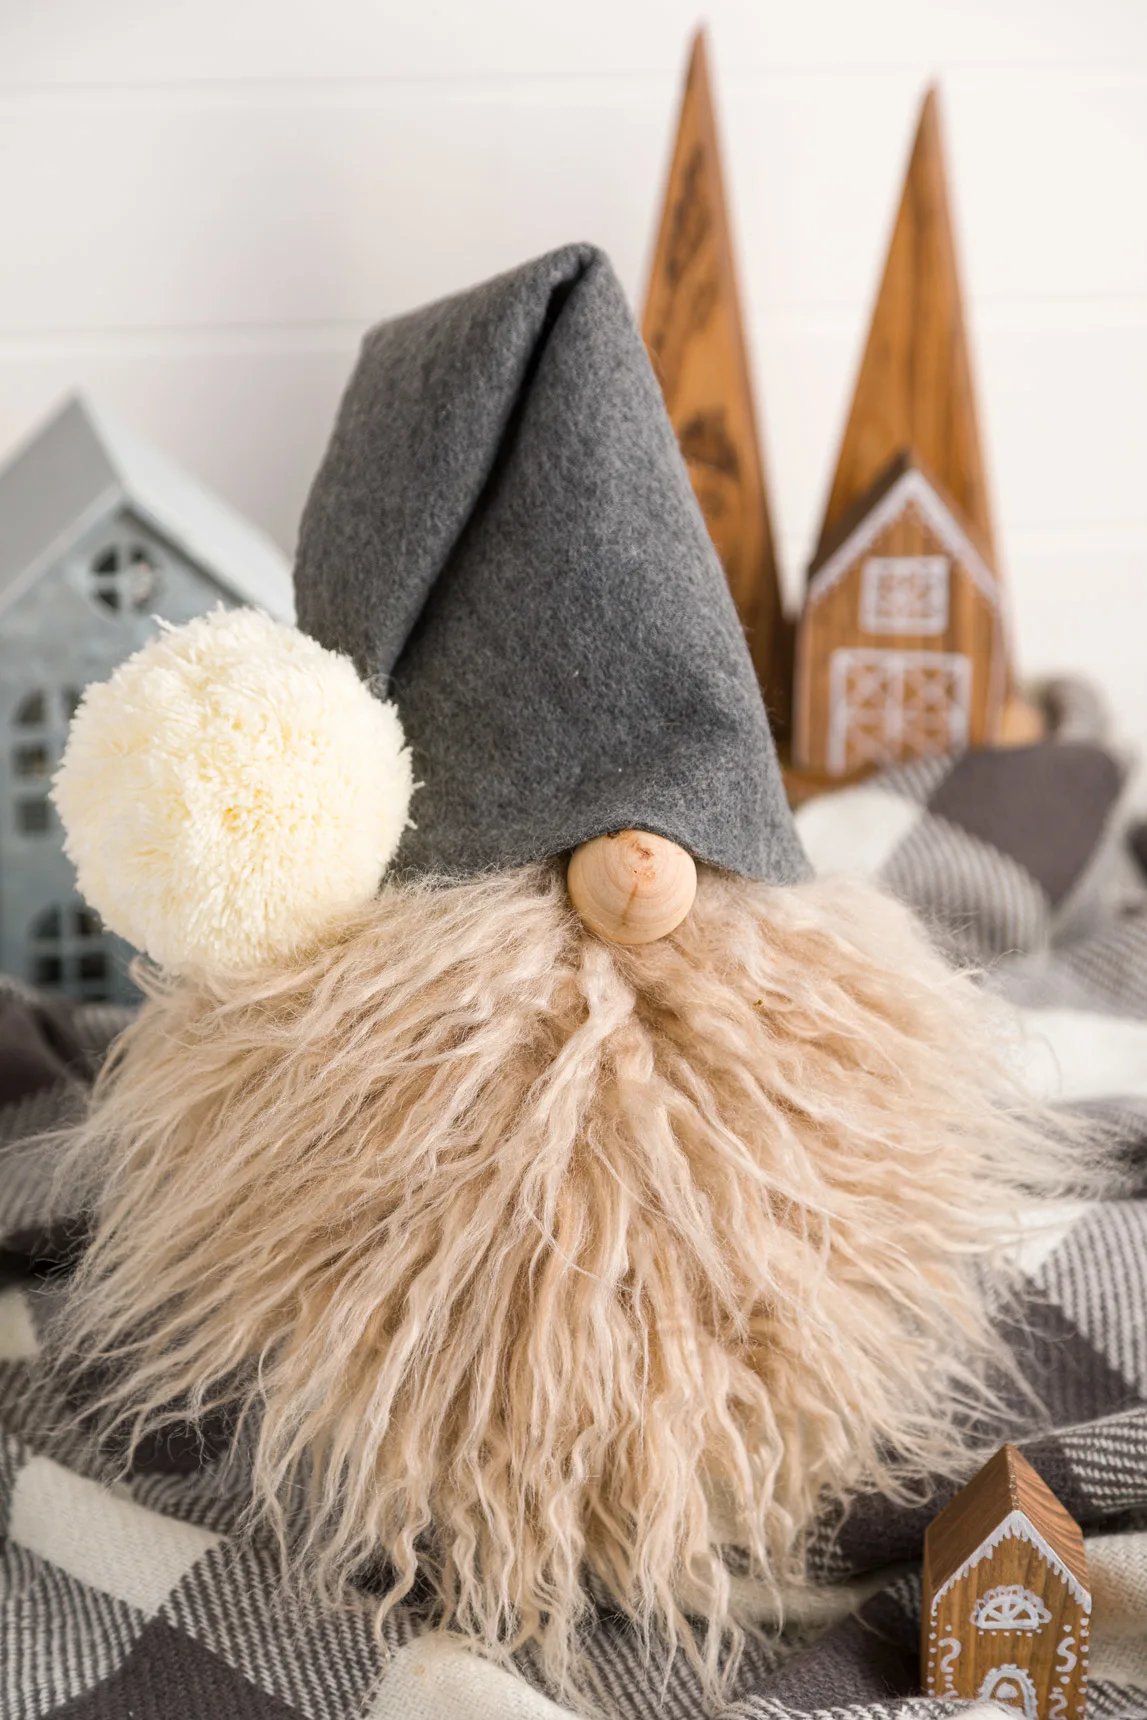 DIY Gnome with a faux fur beard and gray felt hat. Sitting on a gray and while buffalo check throw blanket.